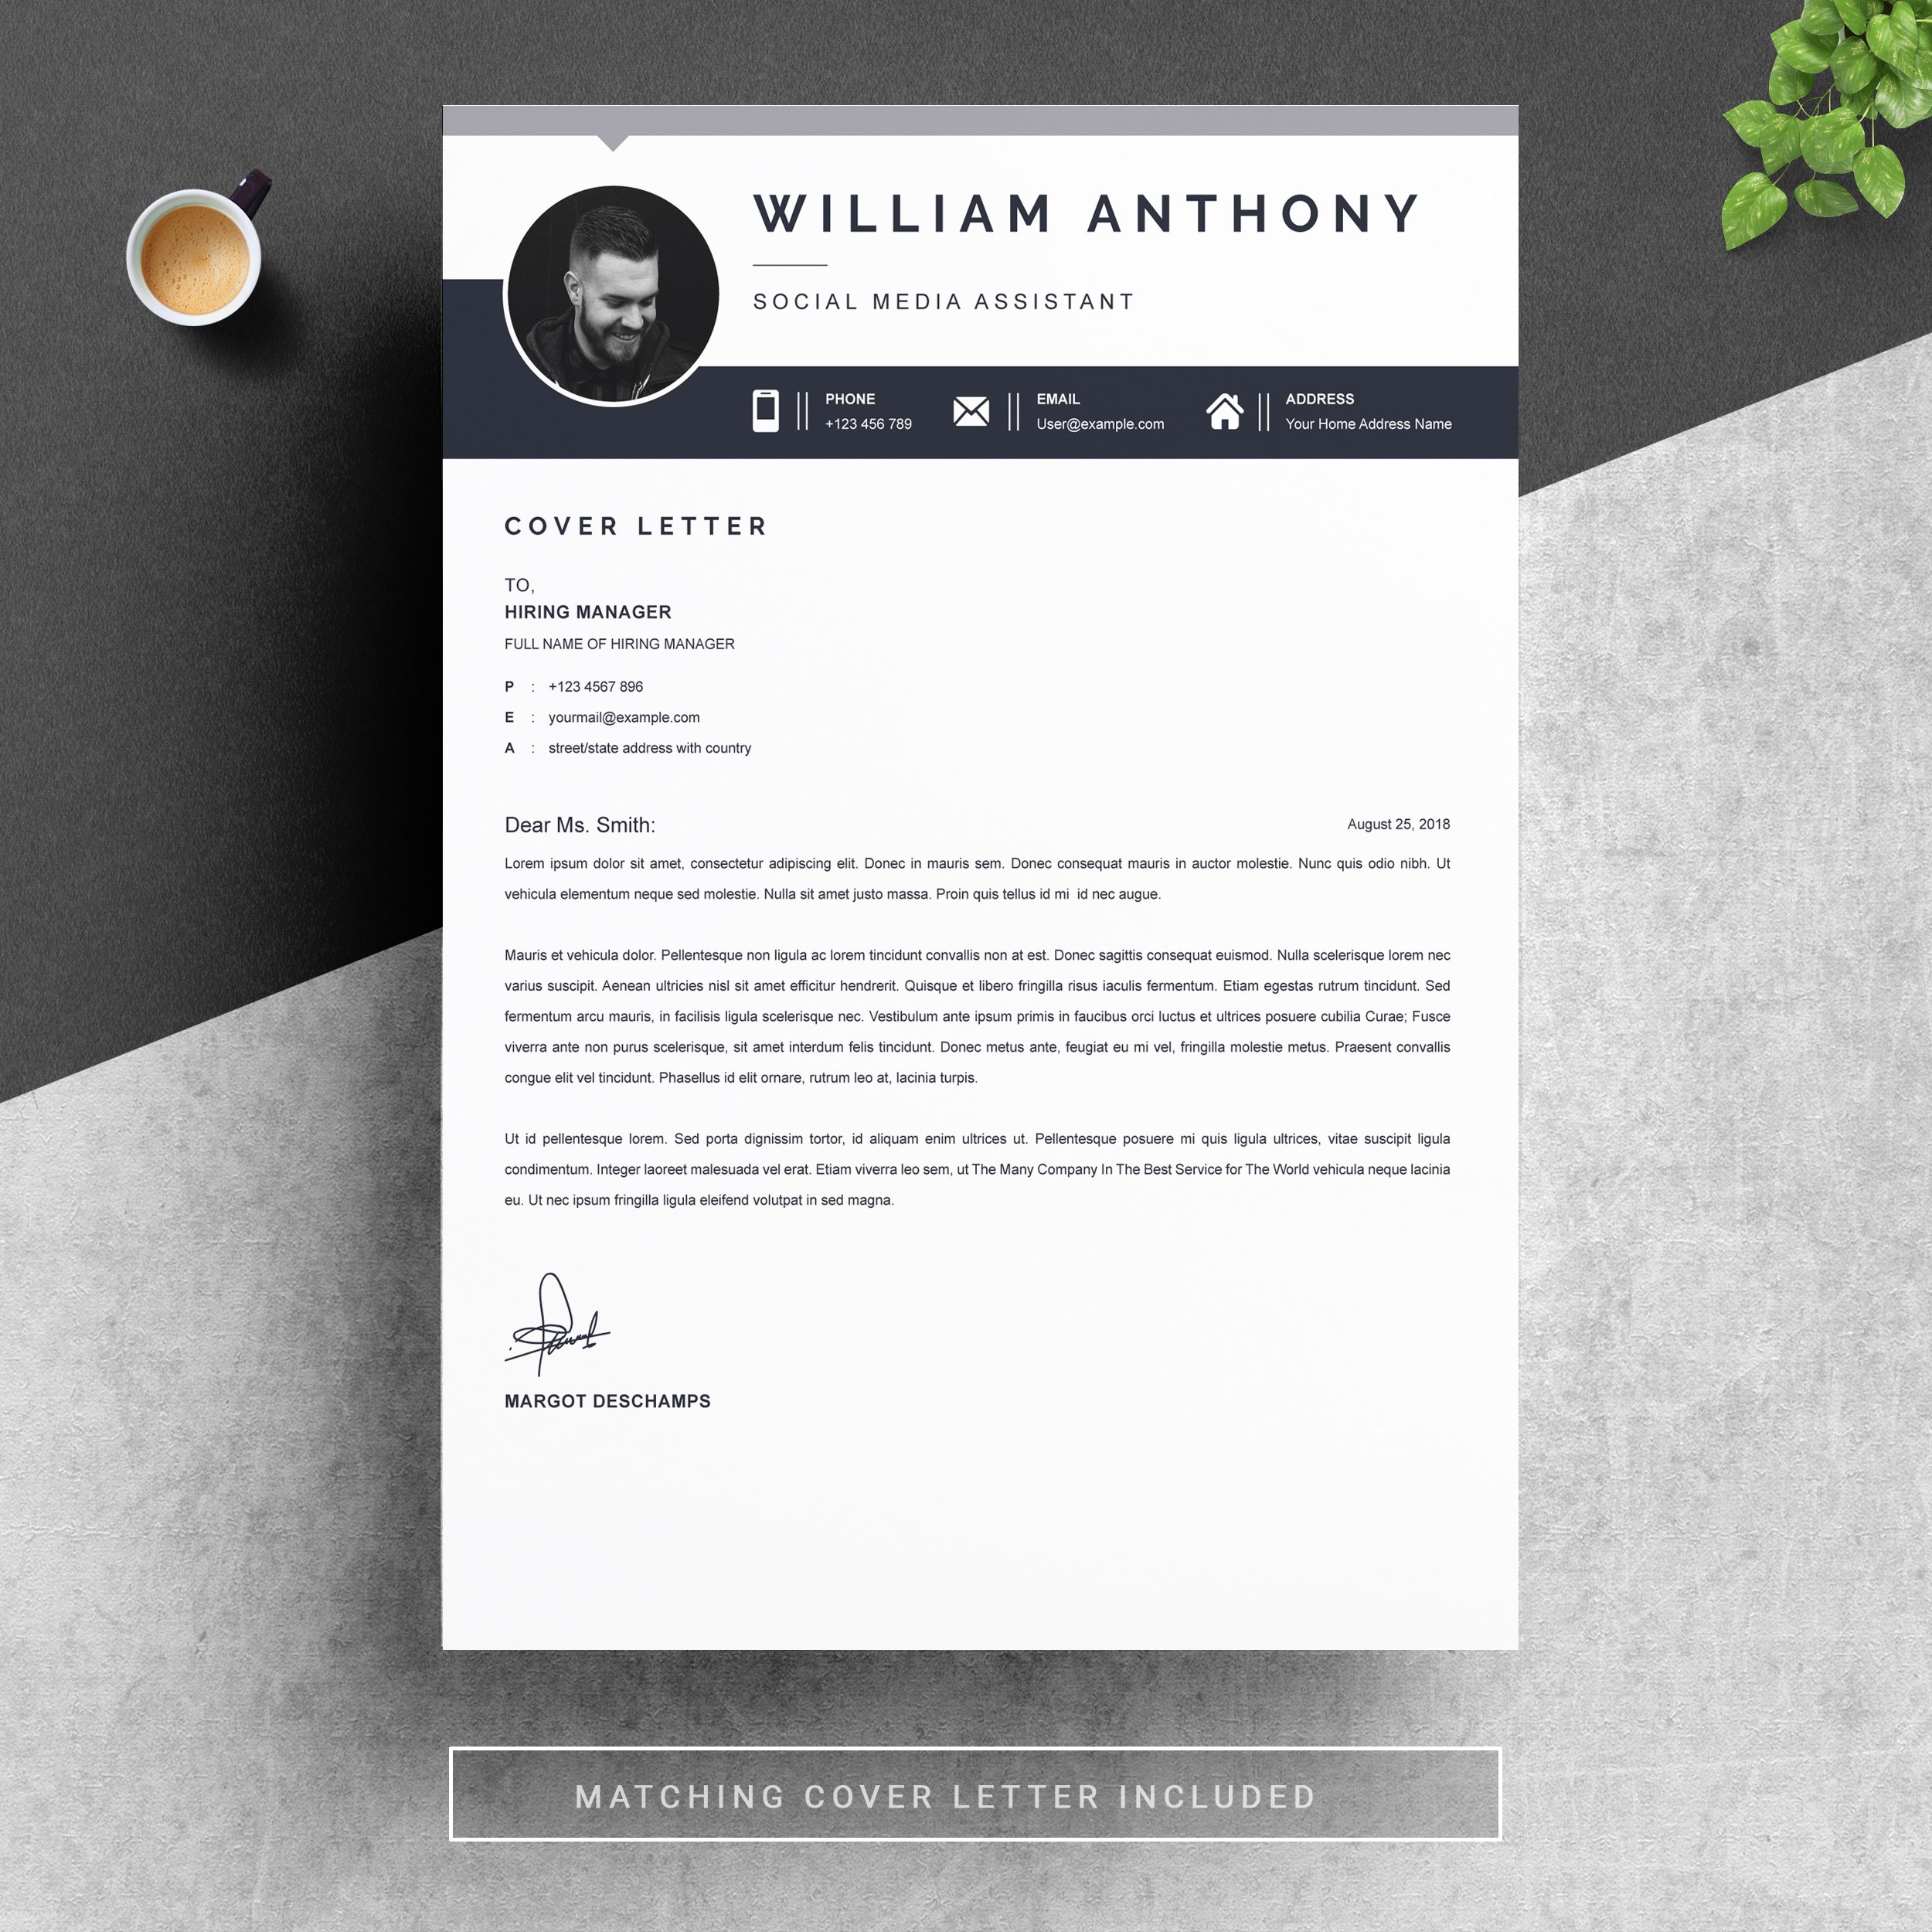 04 resume cover letter page free resume design template 943